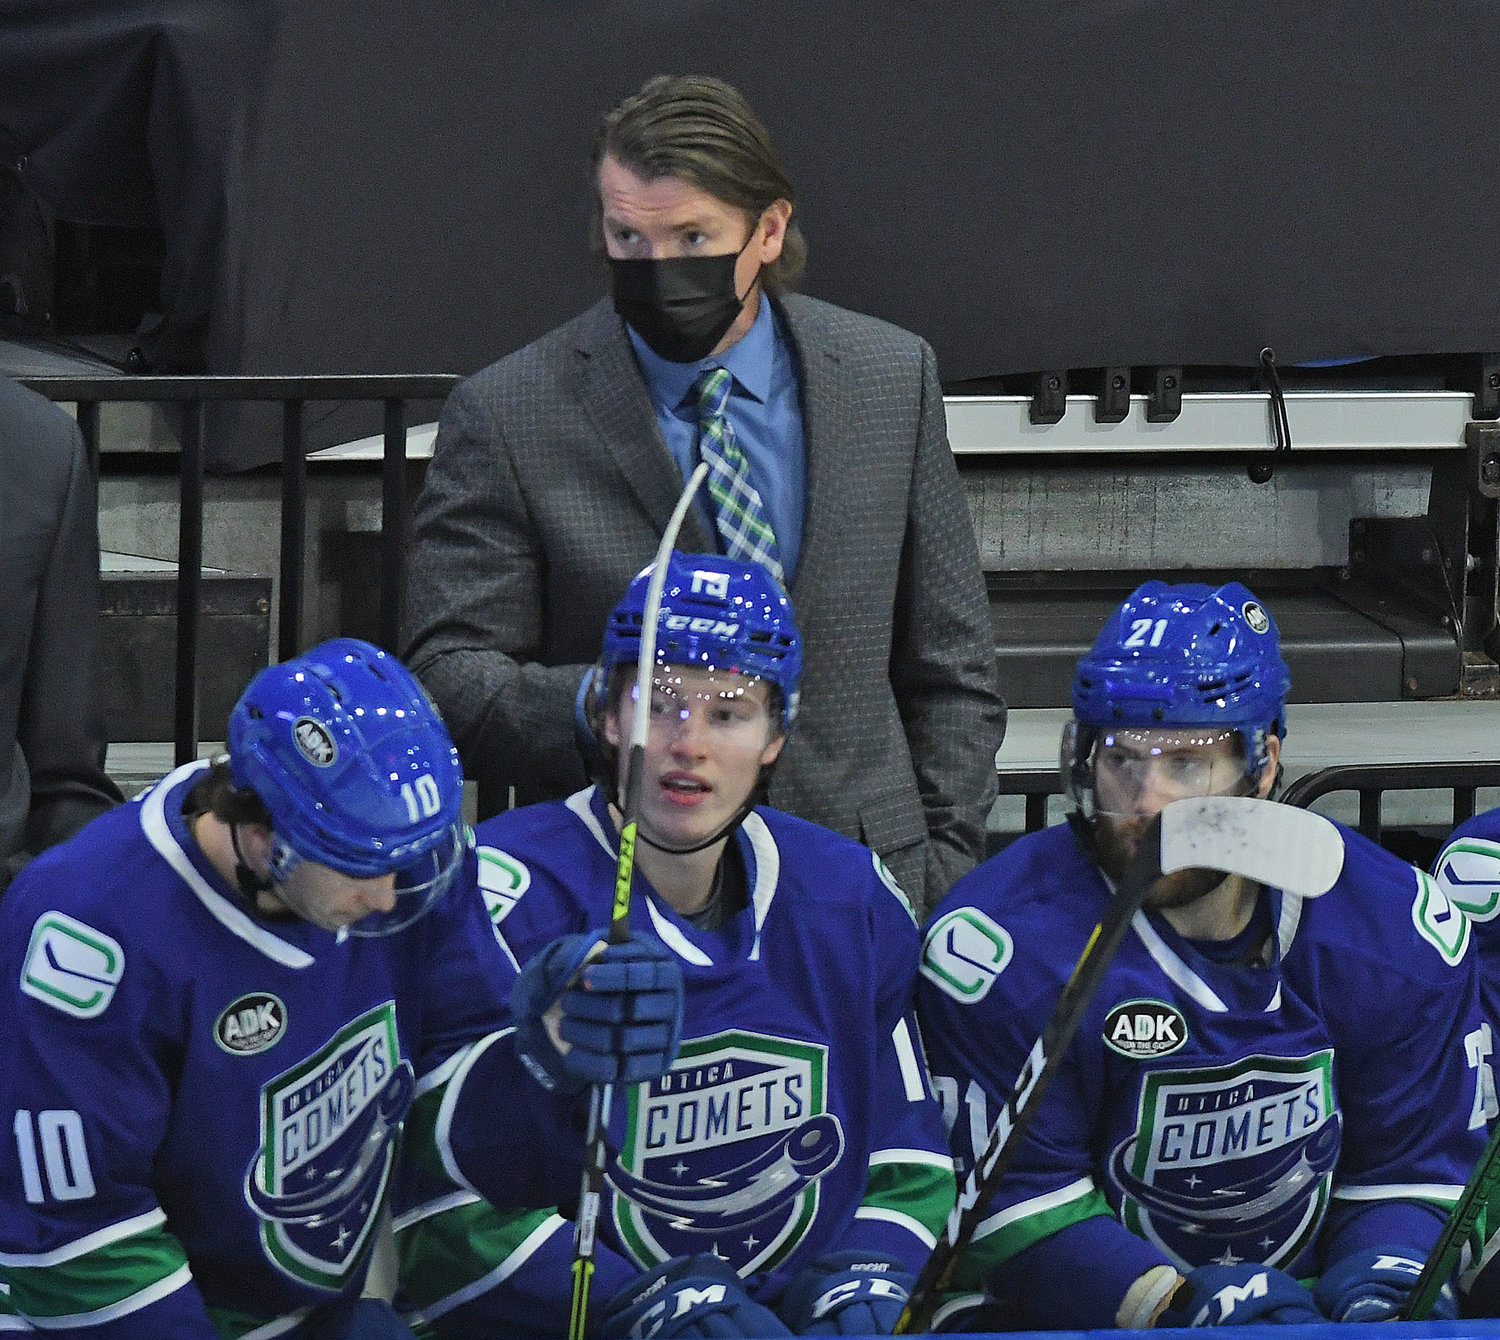 BEHIND THE BENCH — Utica Comets head coach Trent Cull looks on during the first period of Wednesday’s home opener against the Syracuse Crunch. The Comets won 5-2 to improve to 3-1 on the young season.